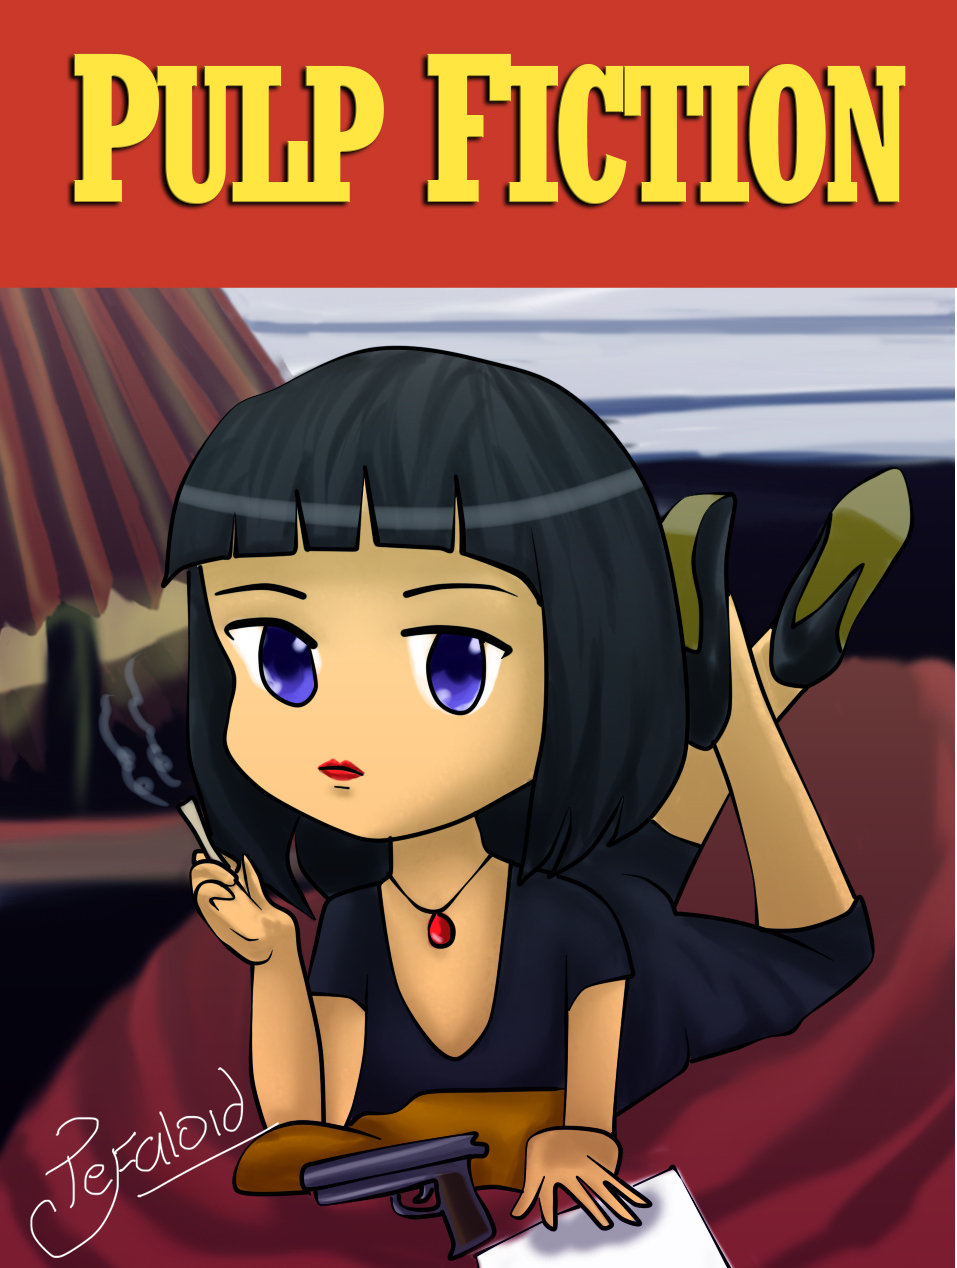 Pulp Fiction Chibi poster by Tefaloid on DeviantArt